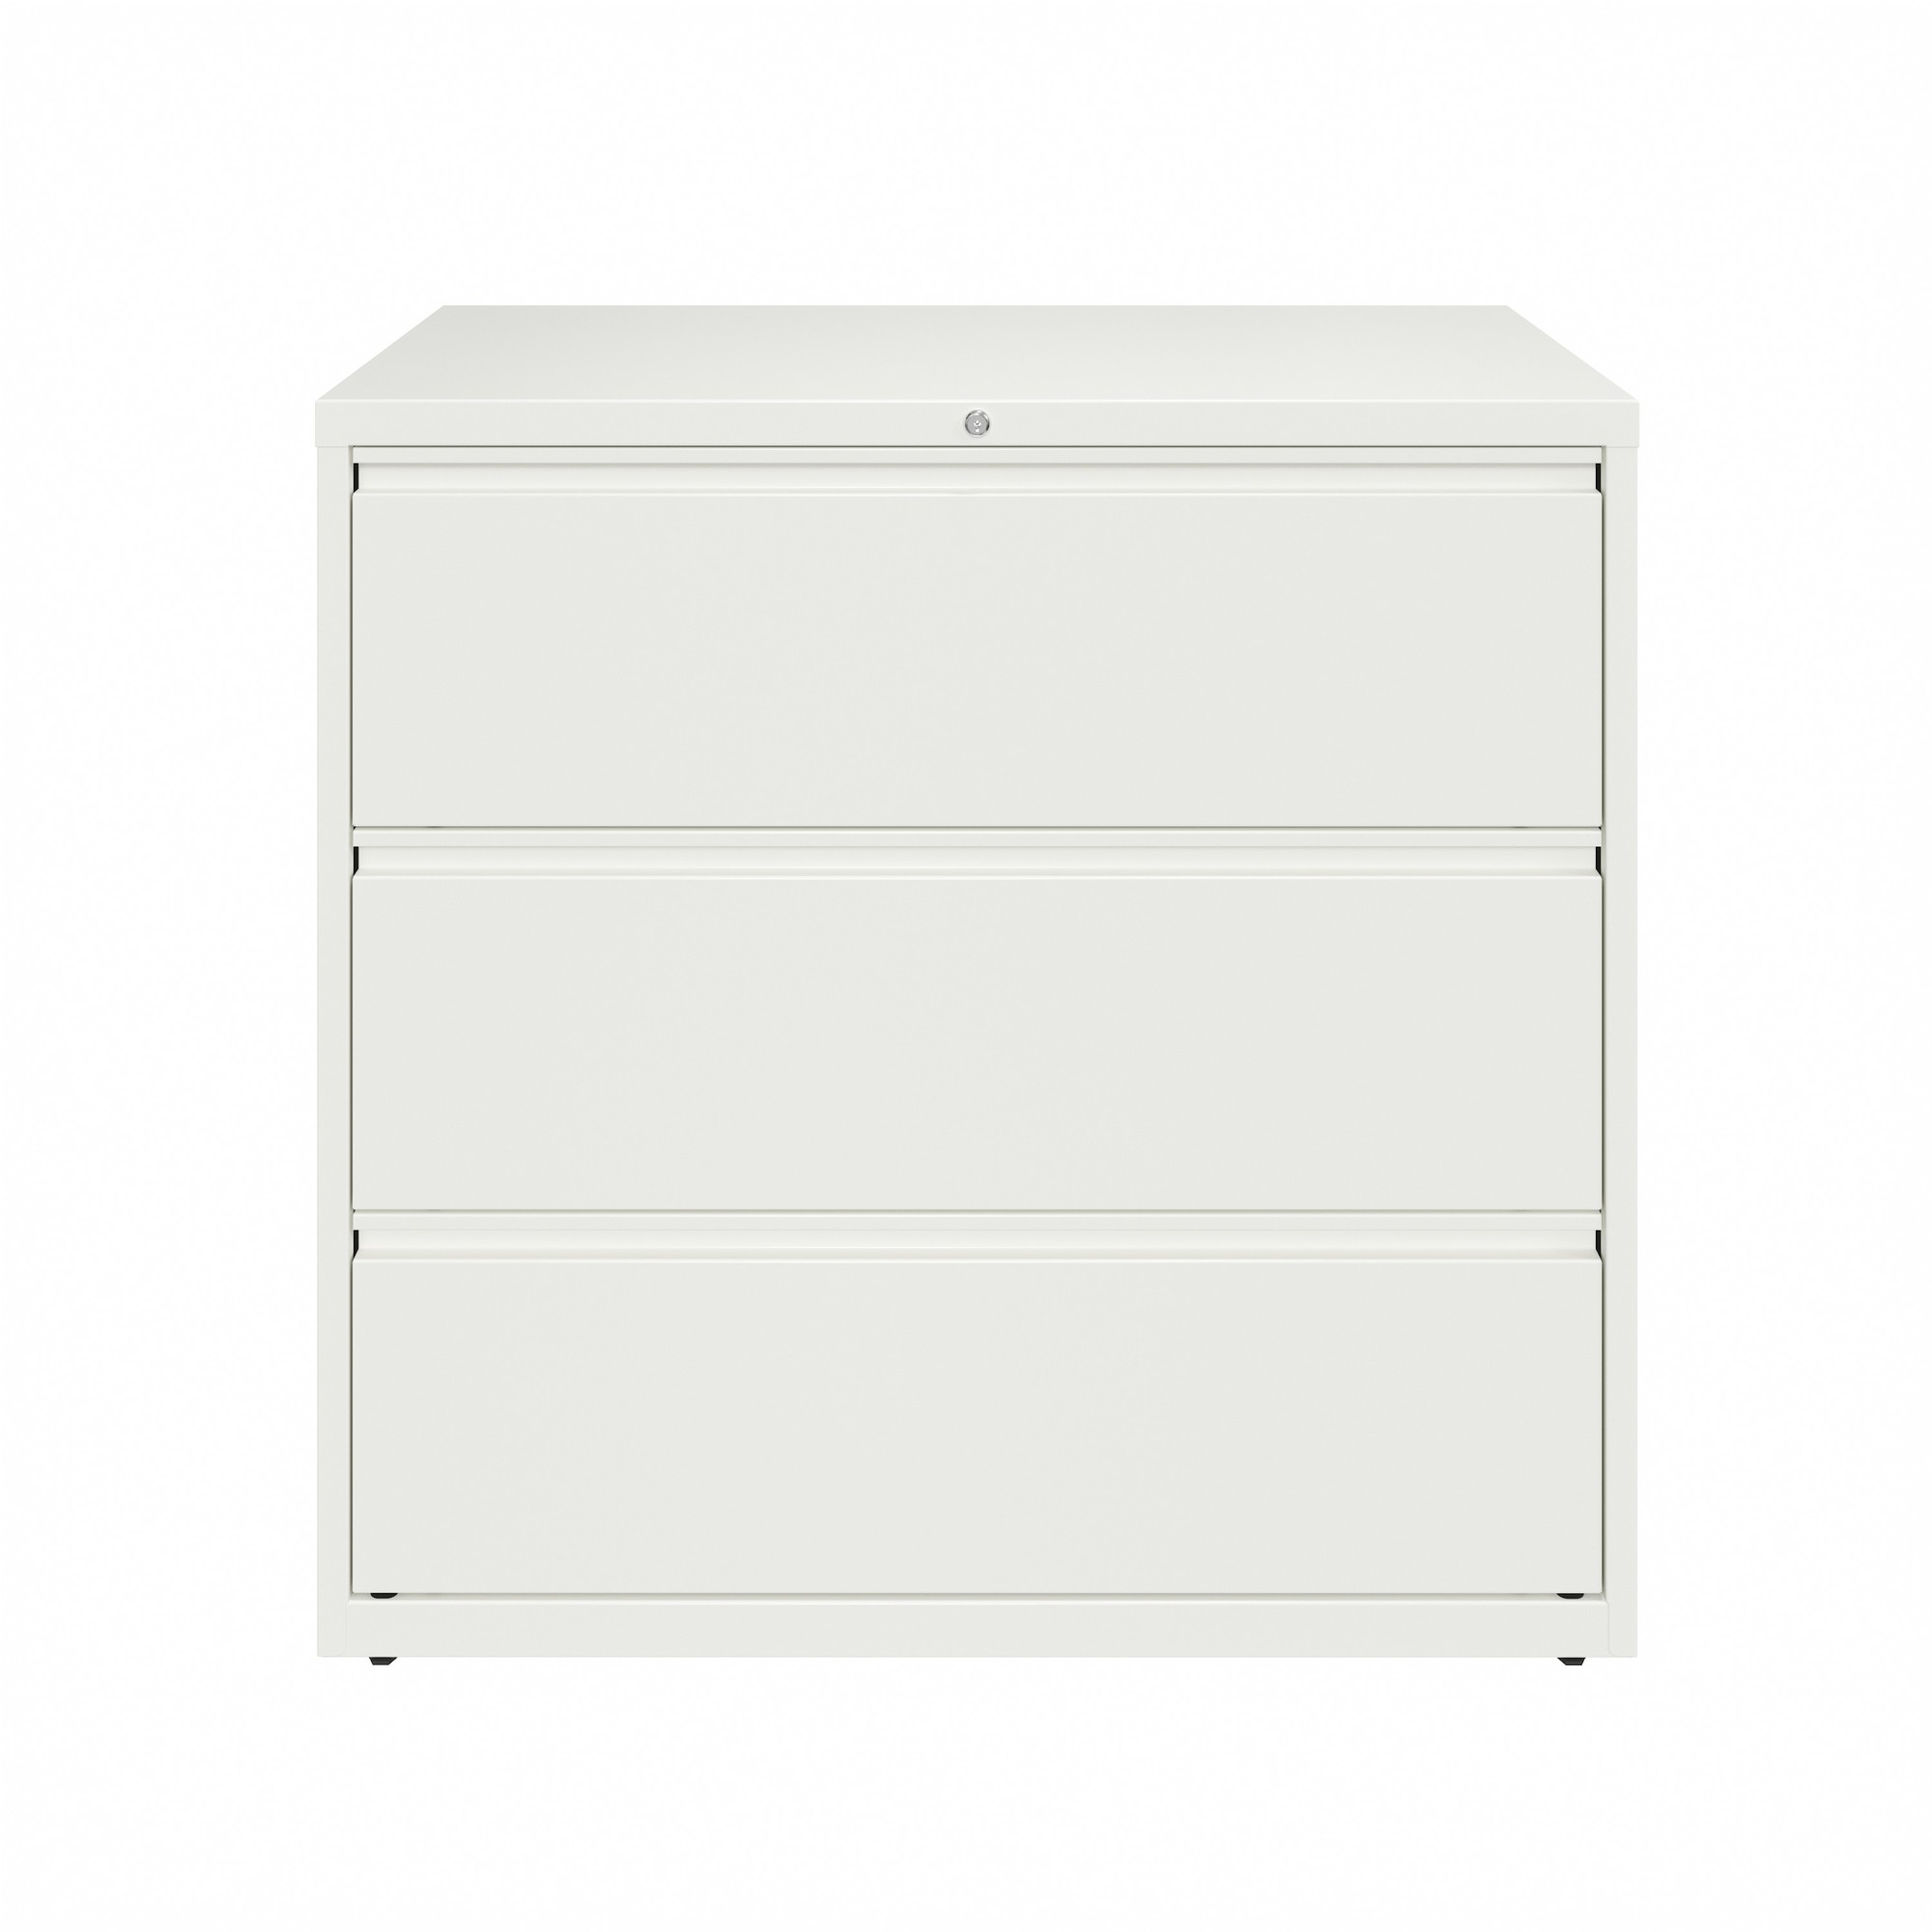 Hirsh Industries, 3 Drawer Lateral File Cabinet, Width 42 in, Depth 18.625 in, Height 40.25 in, Model 23705